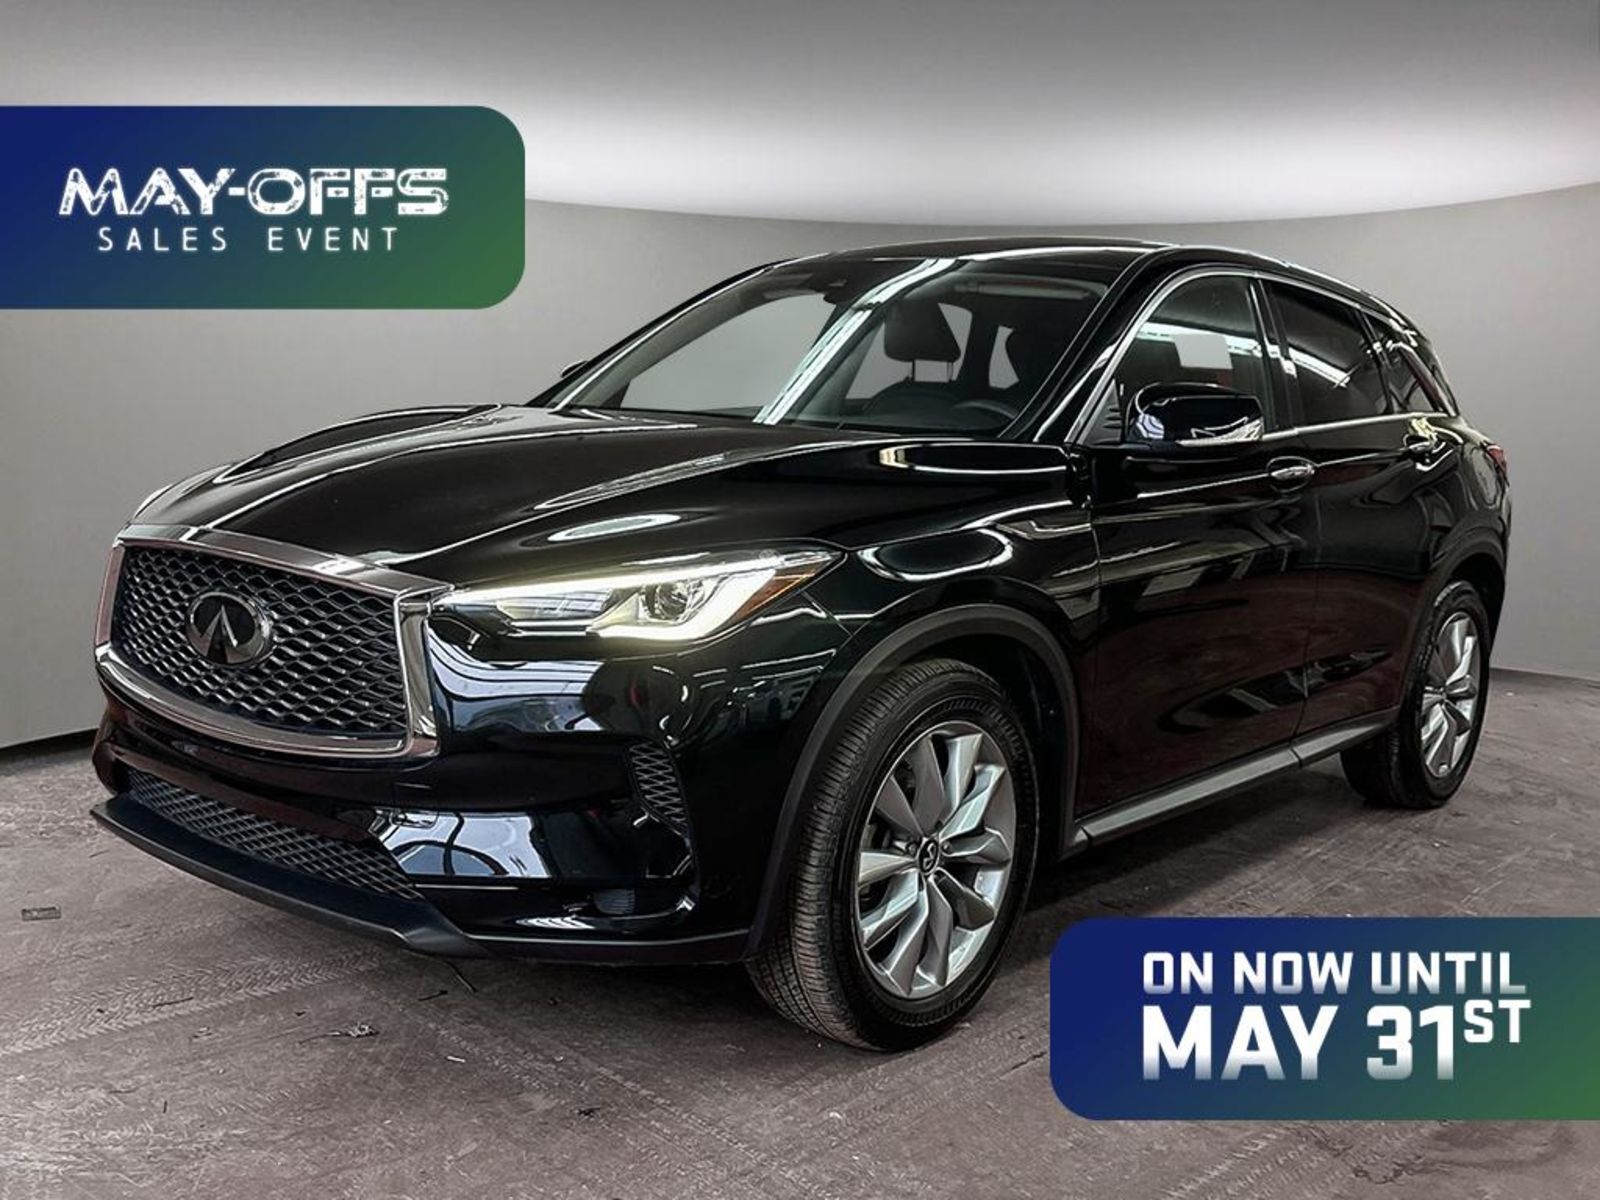 2021 Infiniti QX50 PURE - AWD / Leather / Rear View Cam / No Extra Fe